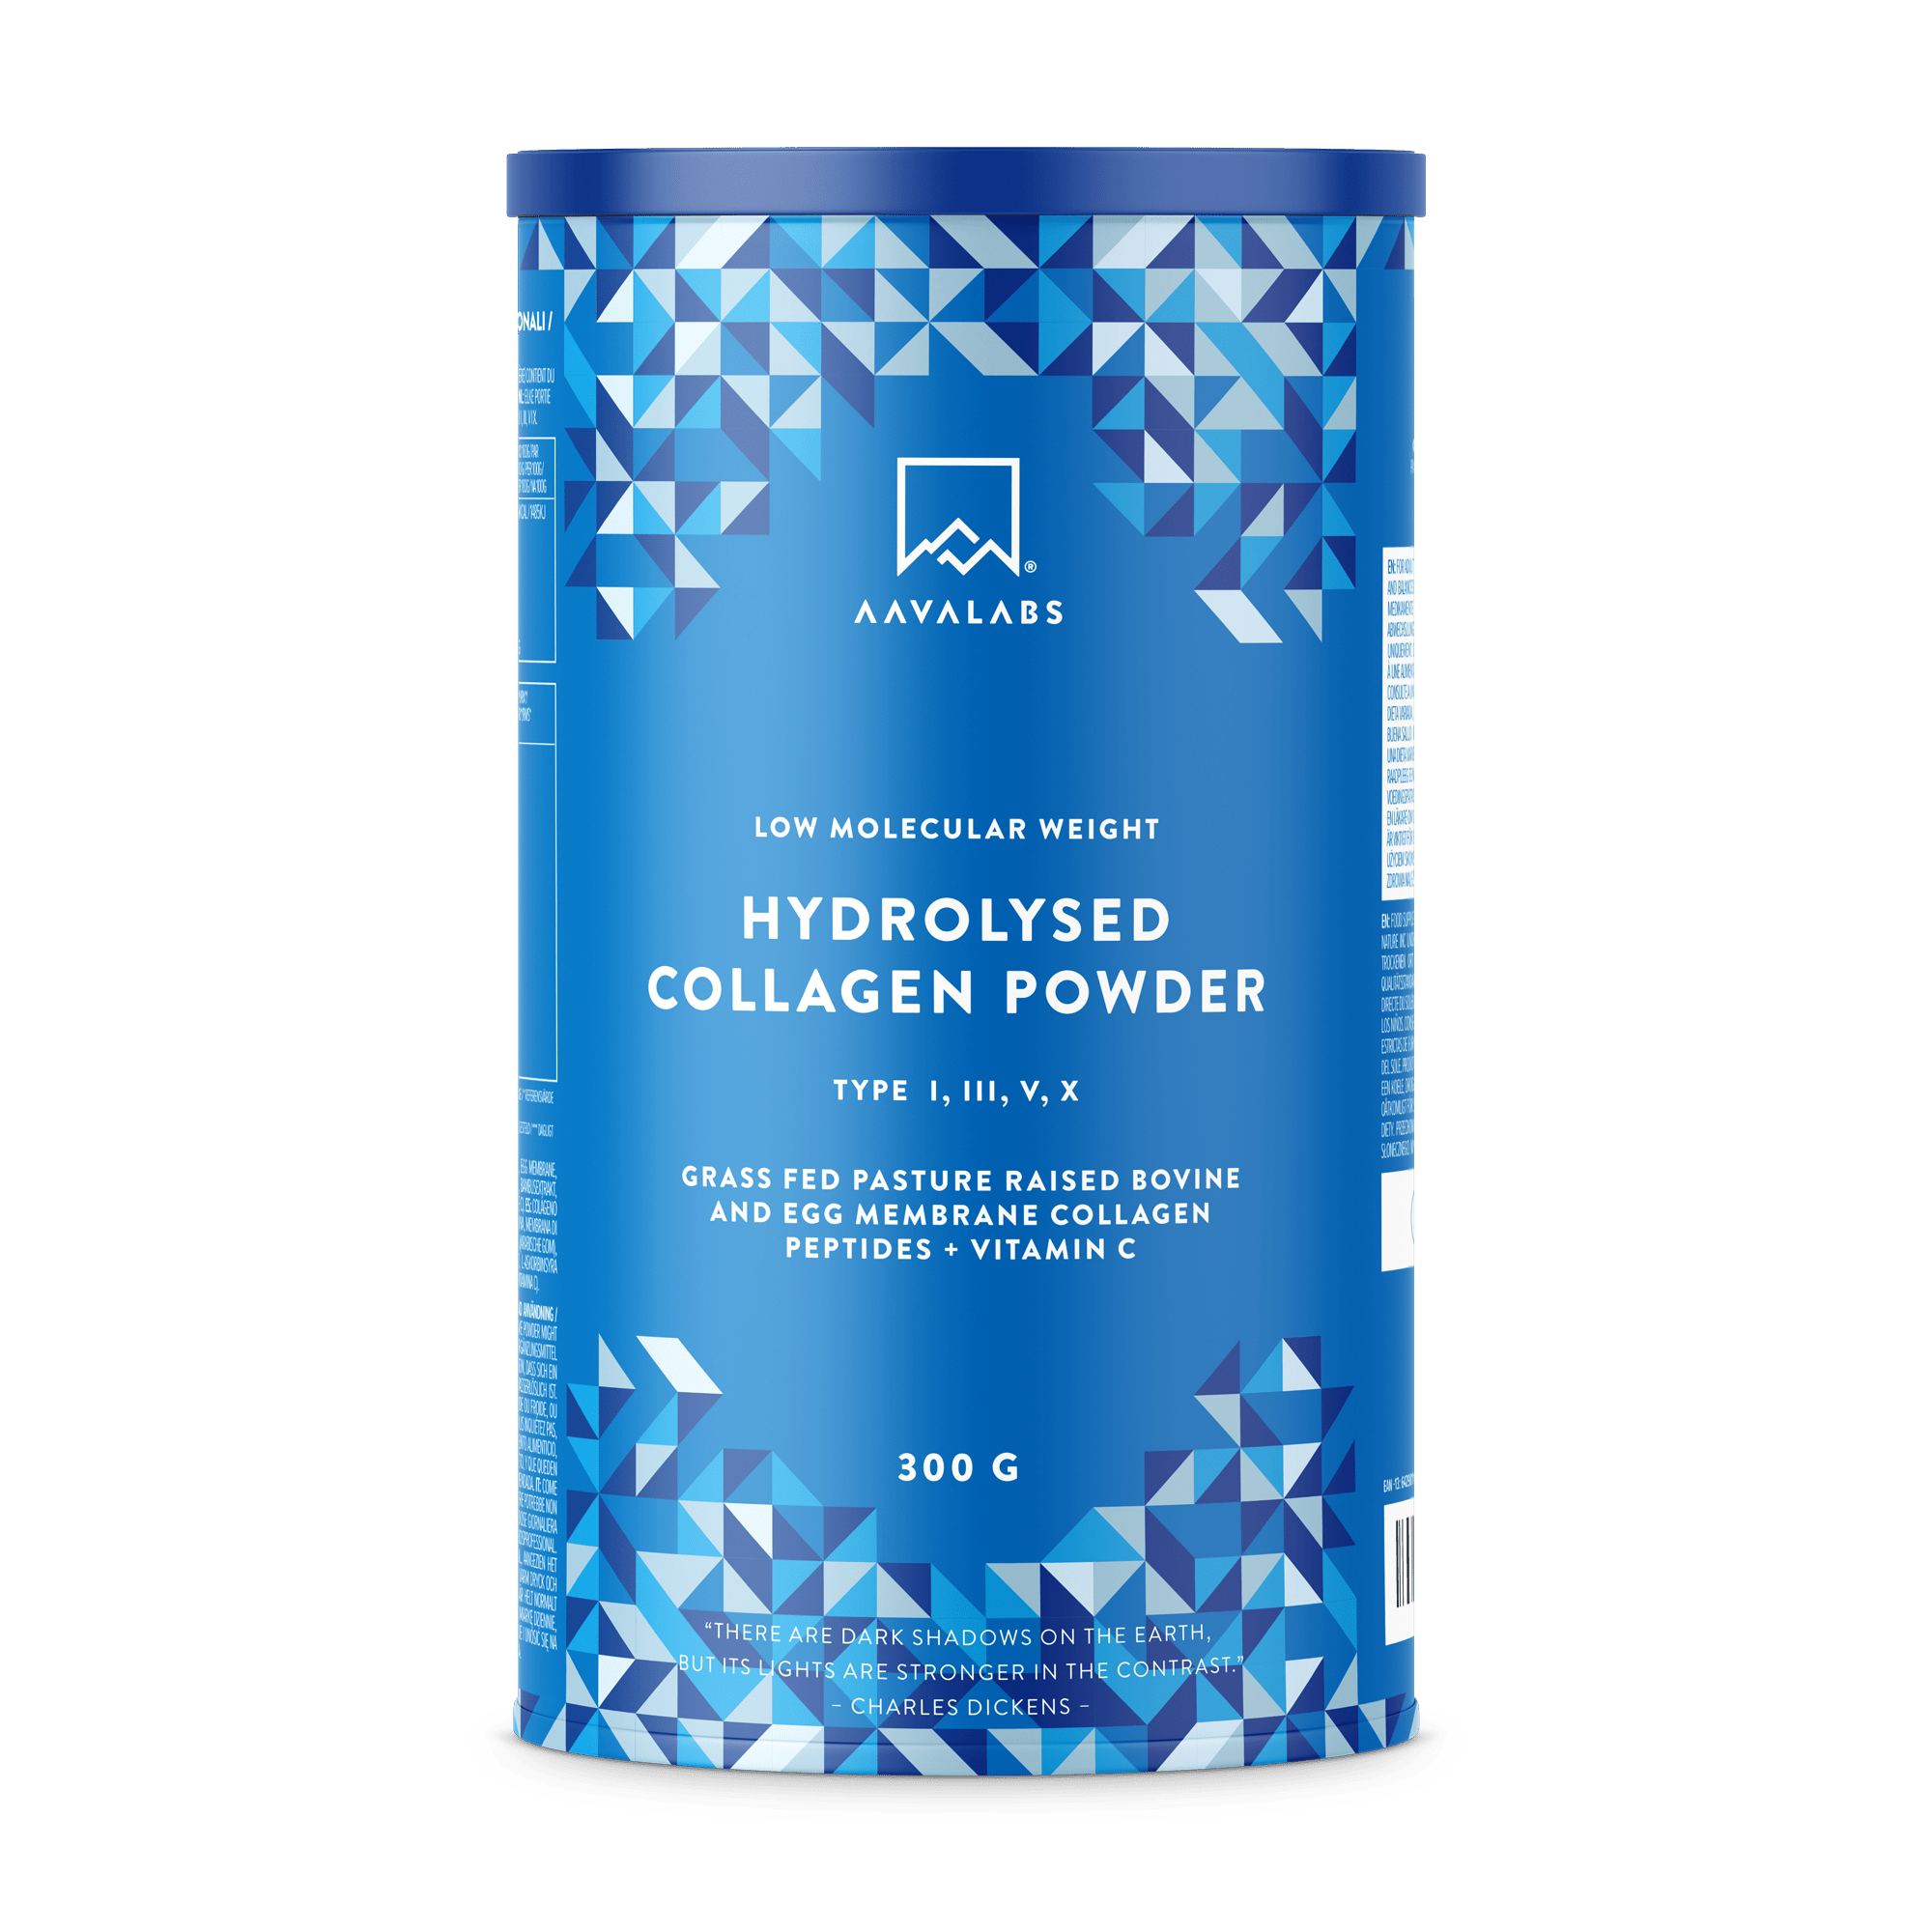 Hydrolysed Collagen Powder with types I, III, V, and X from grass-fed pasture-raised bovine and egg membrane, enriched with vitamin C- AAVALABS